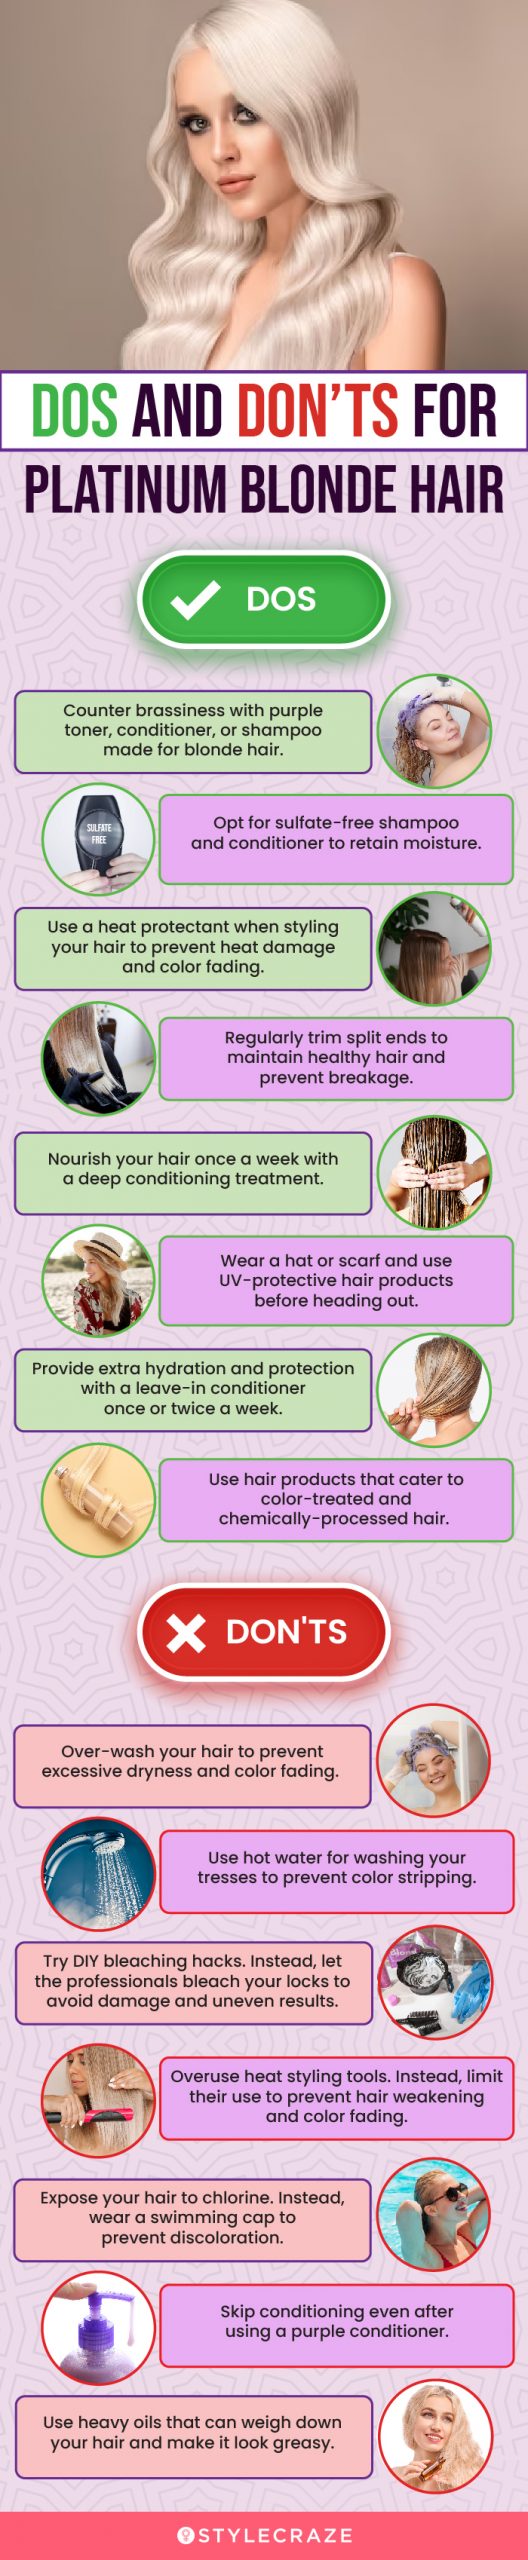 Do’s And Don’ts For Platinum Blonde Hair(infographic)